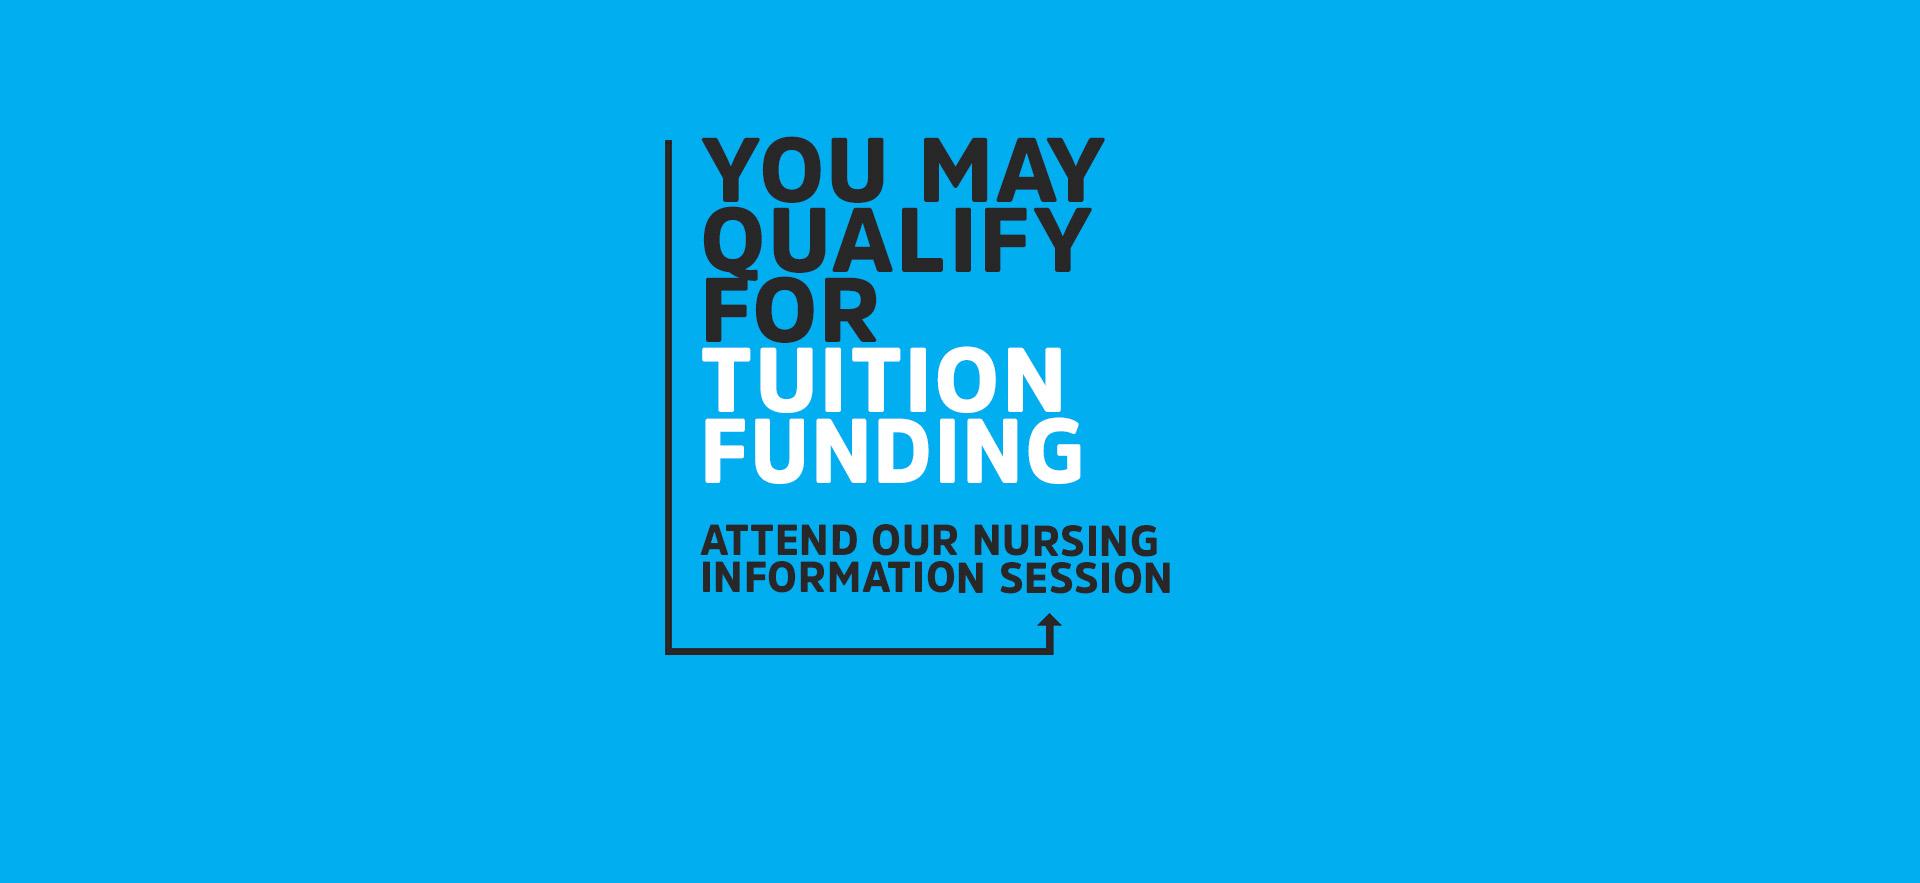 You may qualify for tuition funding. Attend our Nursing Information Session.